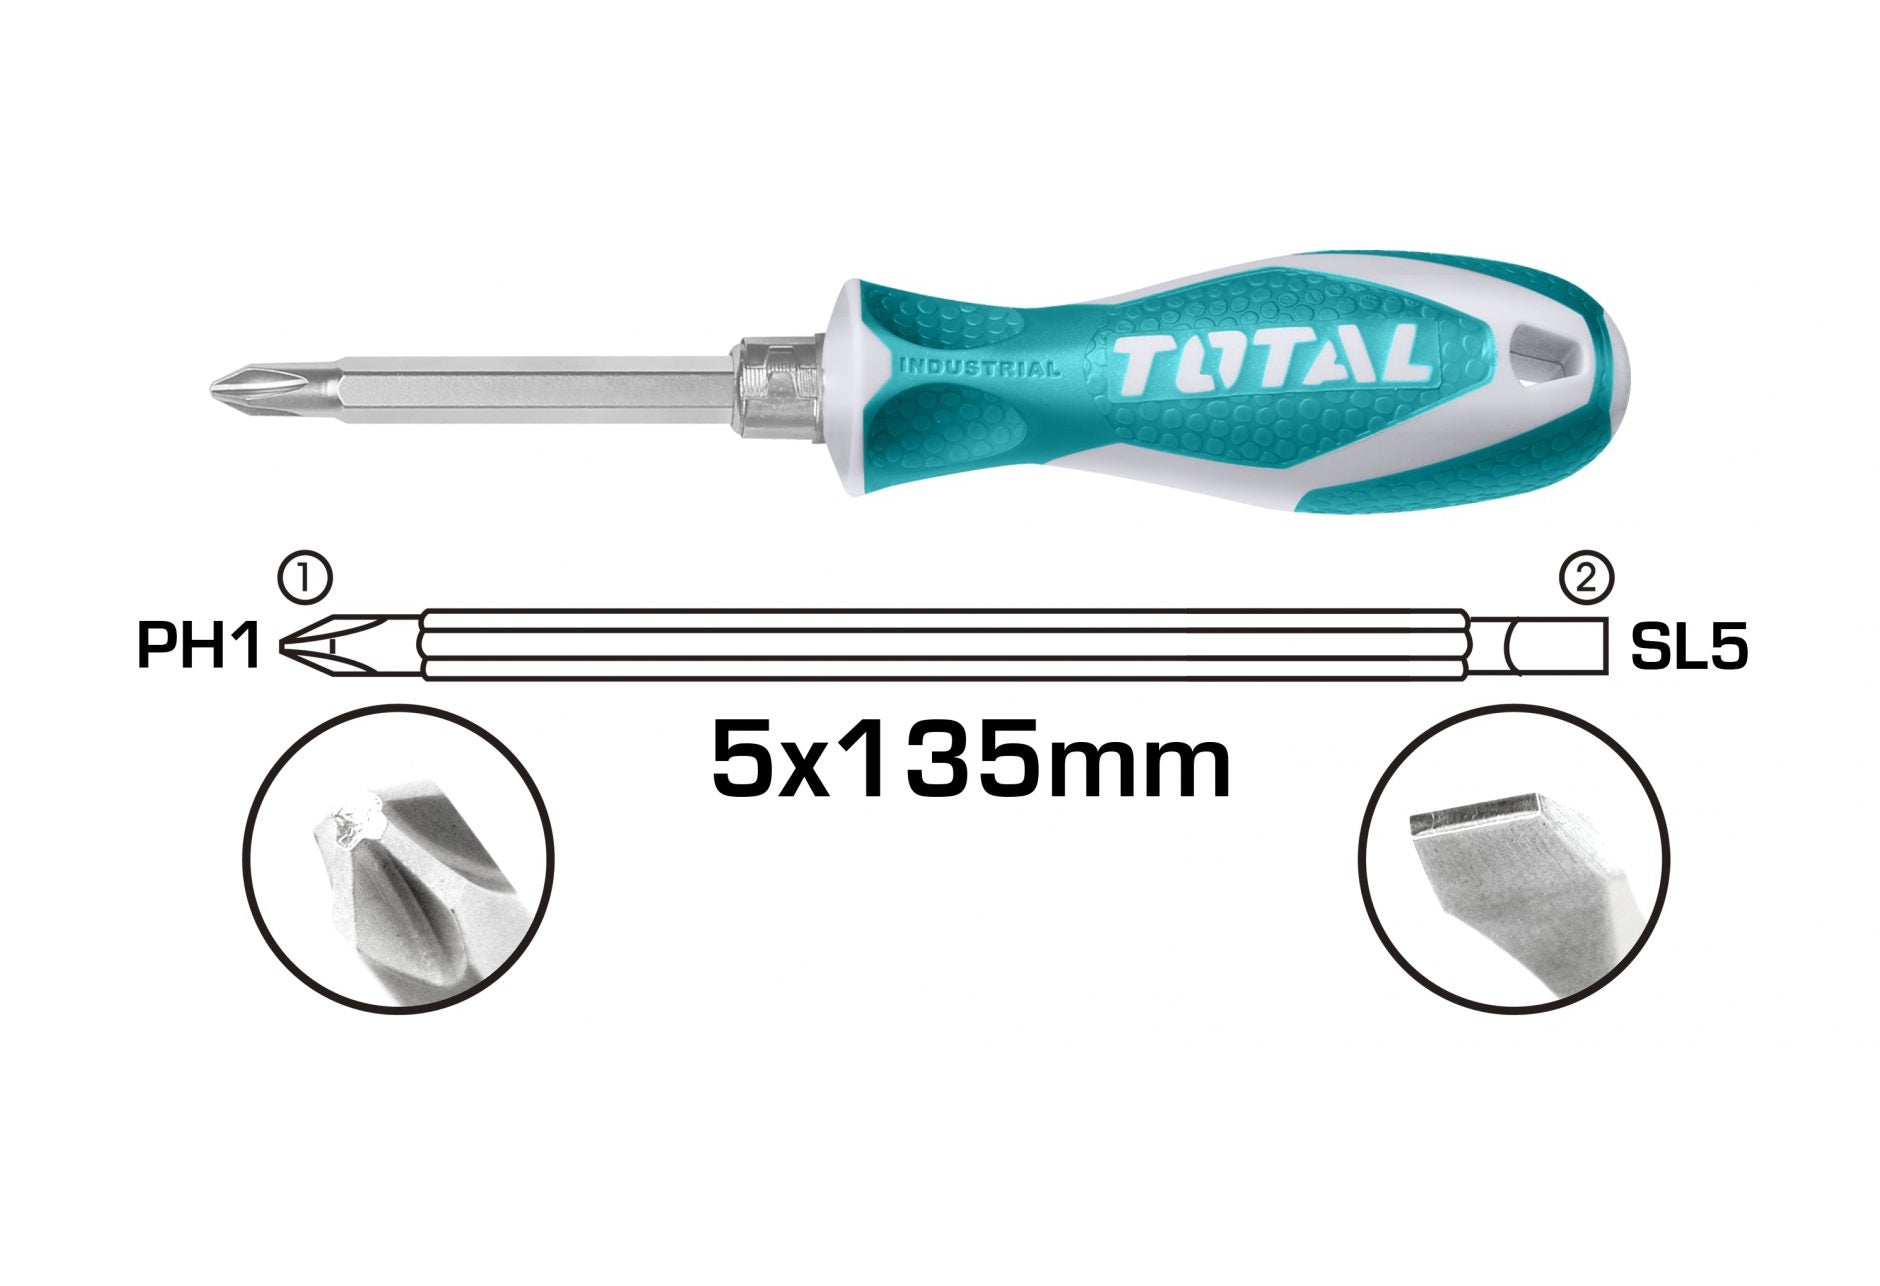 Total THT250226 2-in1 Screwdriver | Total by KHM Megatools Corp.